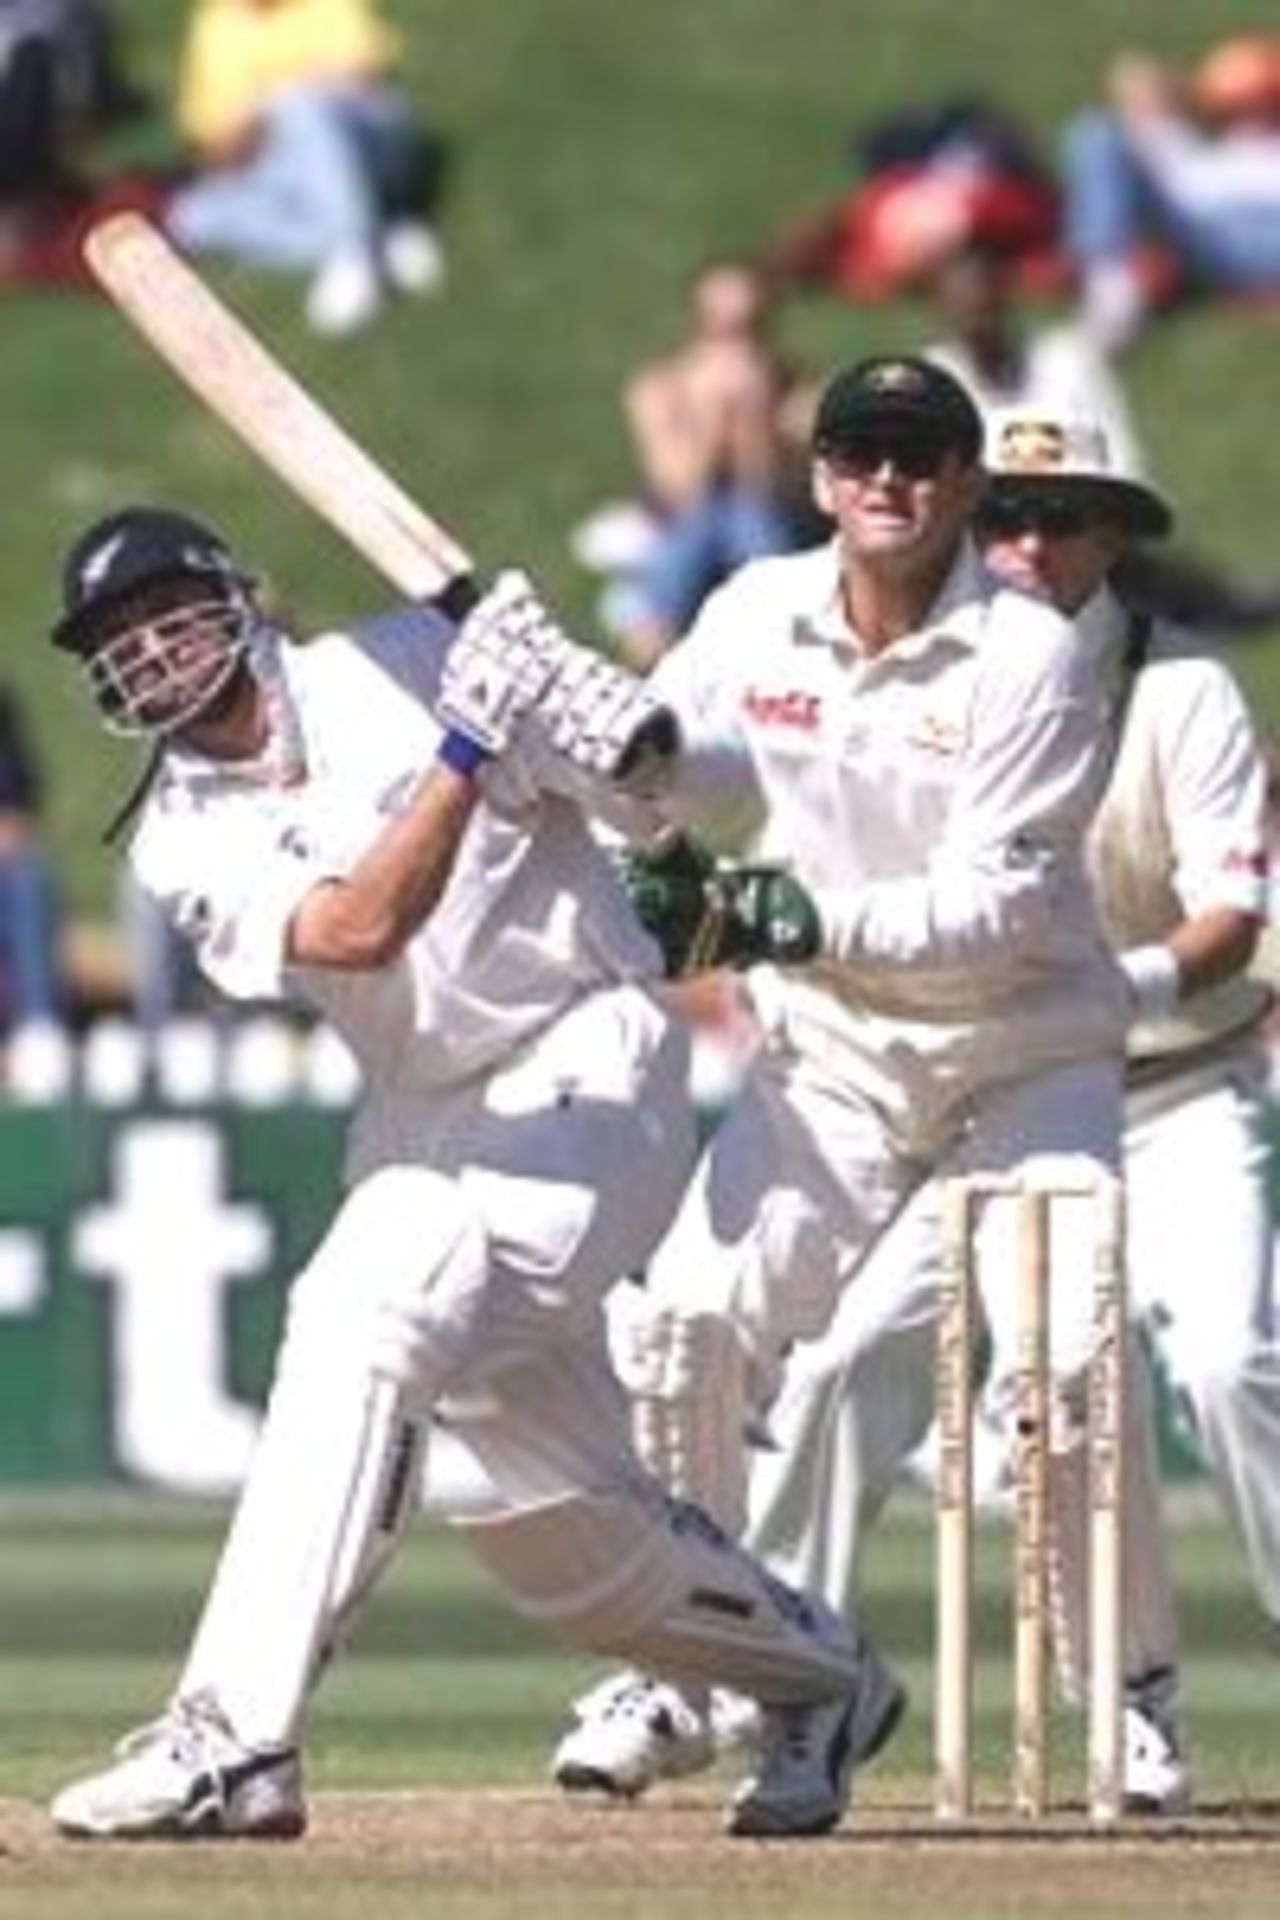 27 Mar 2000: Simon Doull of New Zealand hits out with Adam Gilchrist of Australia looking on, during day four of the second test between New Zealand and Australia at the Basin Reserve, Wellington, New Zealand.